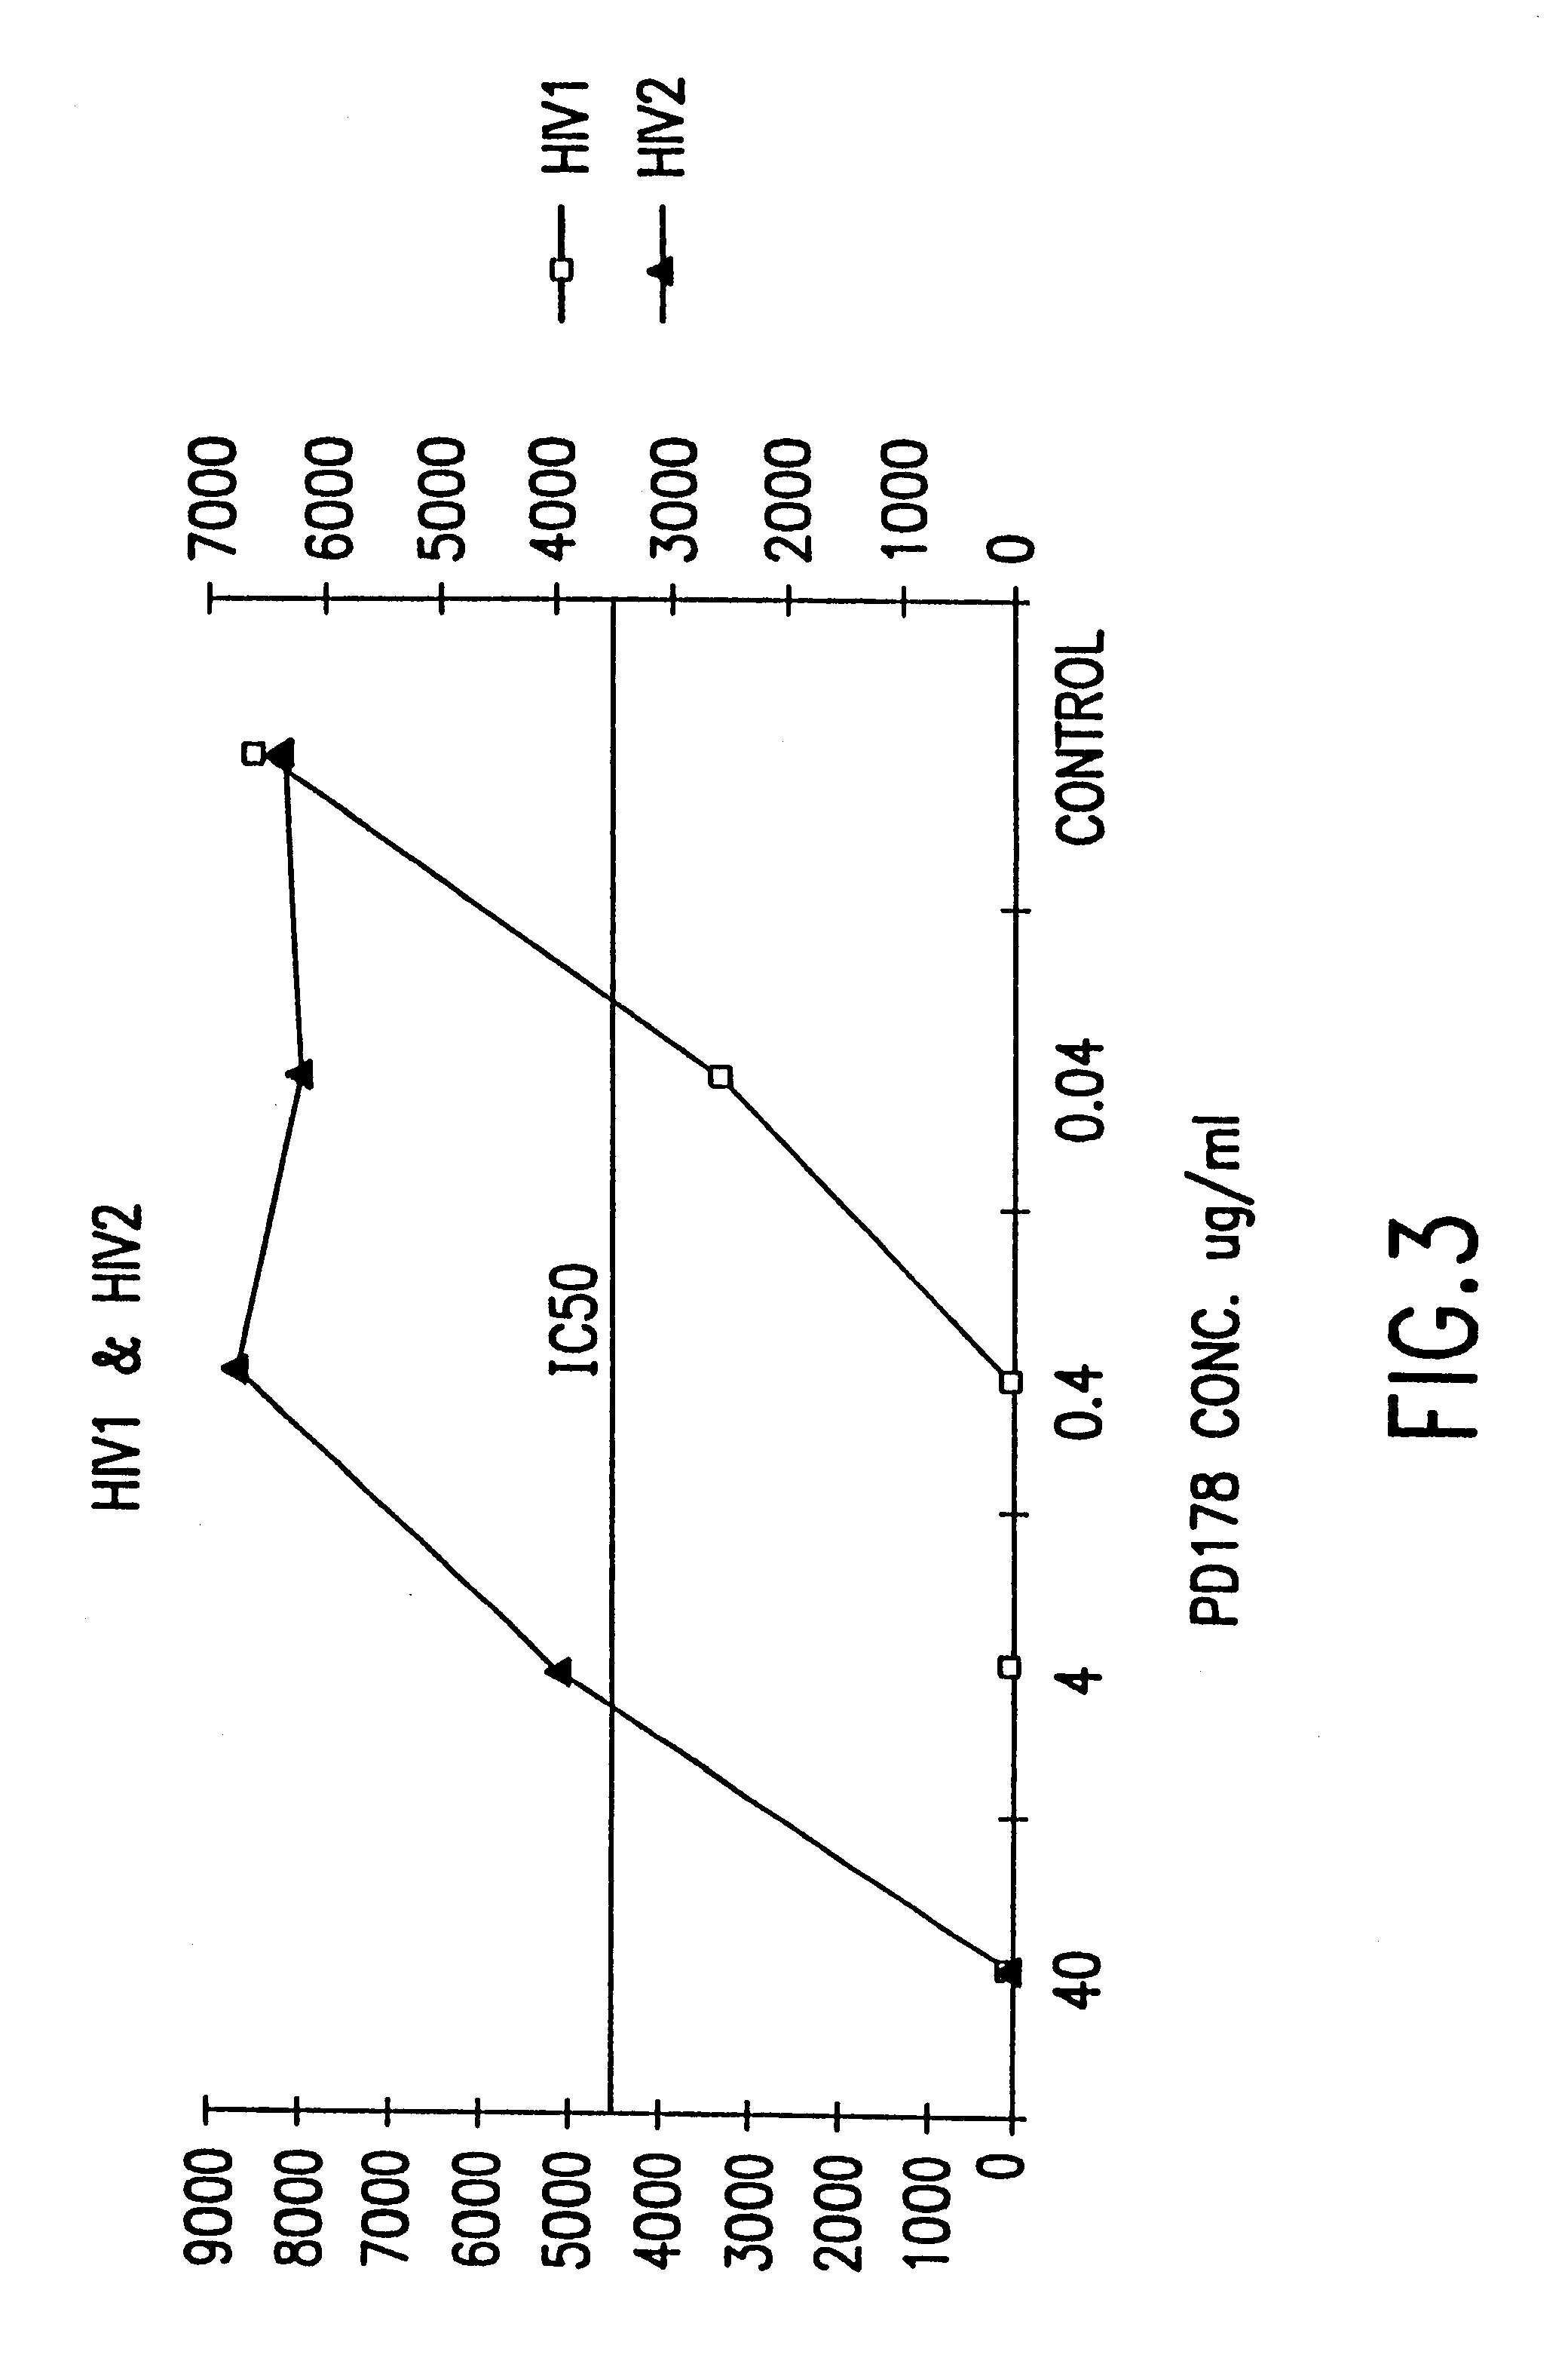 Methods for the inhibition of epstein-barr virus transmission employing anti-viral peptides capable of abrogating viral fusion and transmission